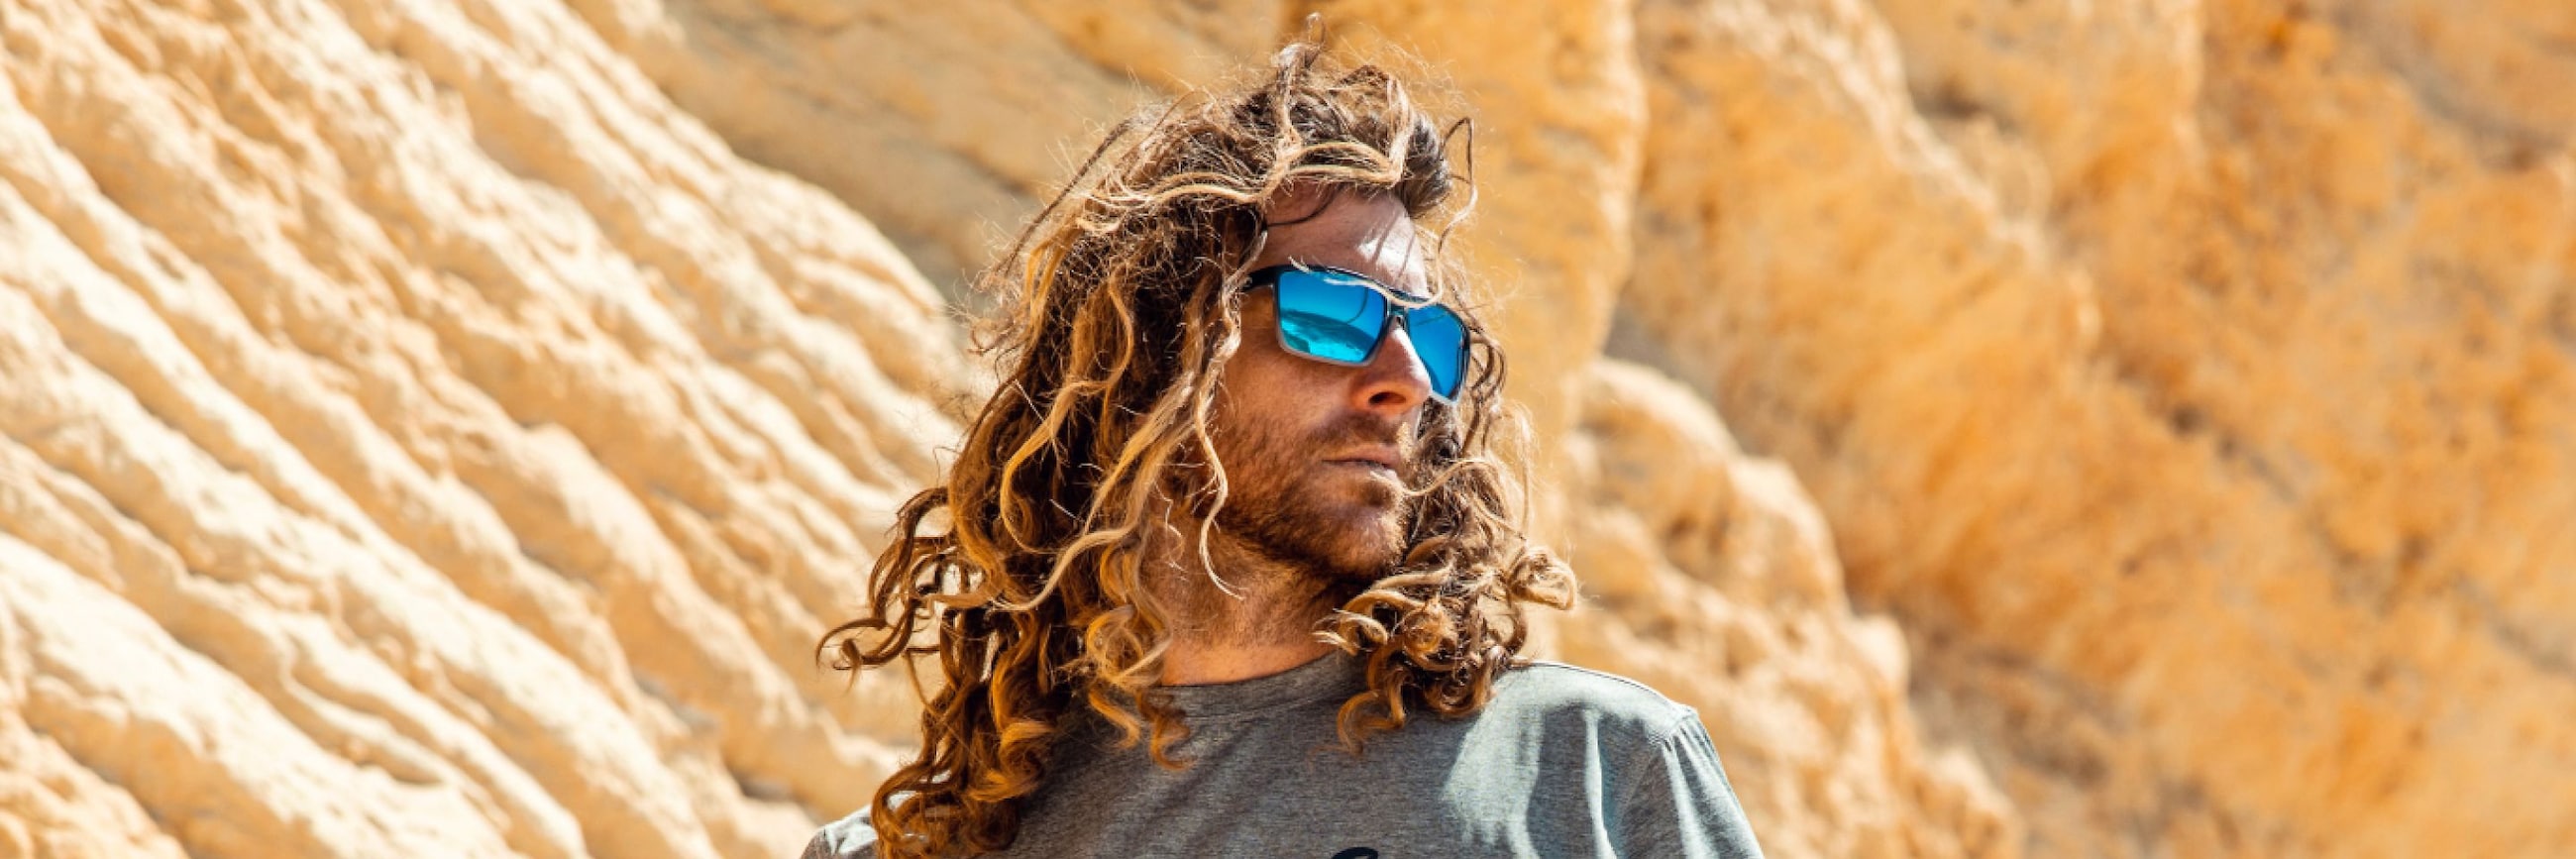 Why UV Protection Is Essential for Your Outdoor Adventures